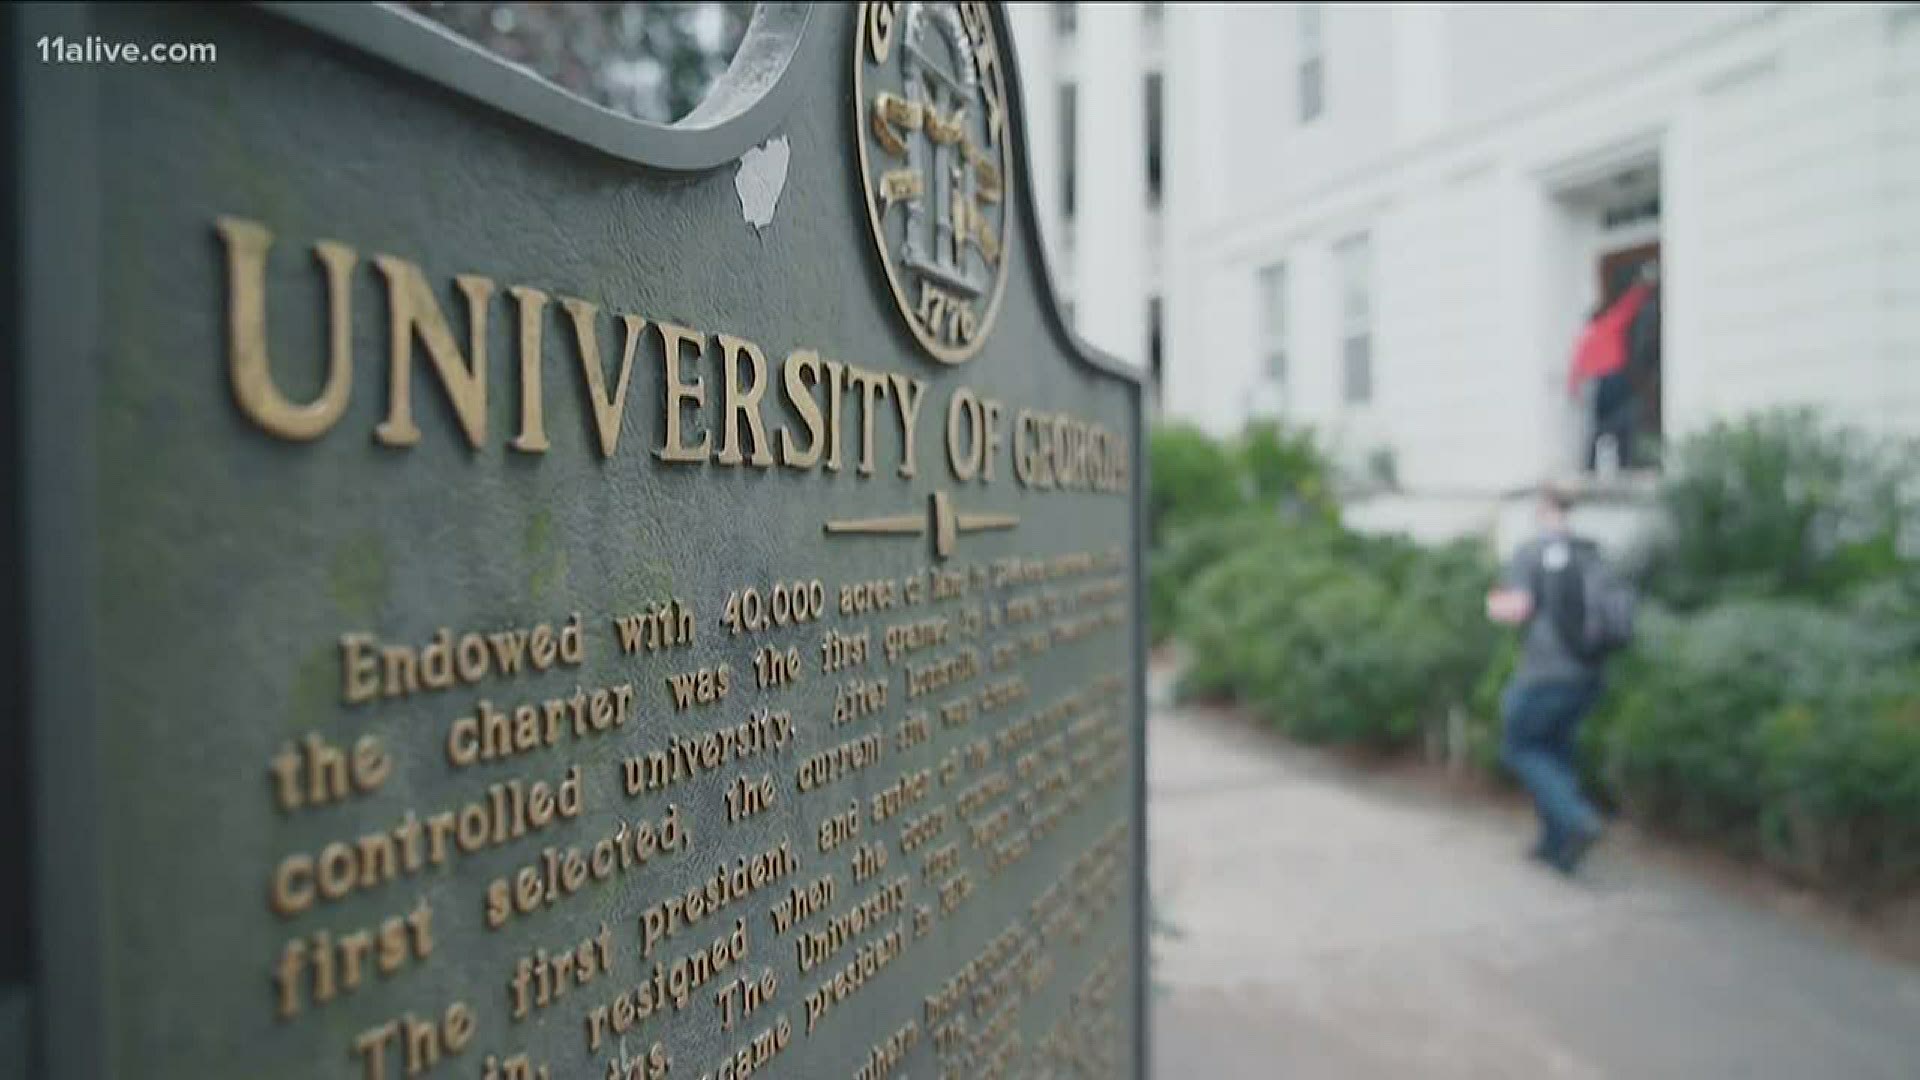 Universities are planning to resume normal operations in the Fall.